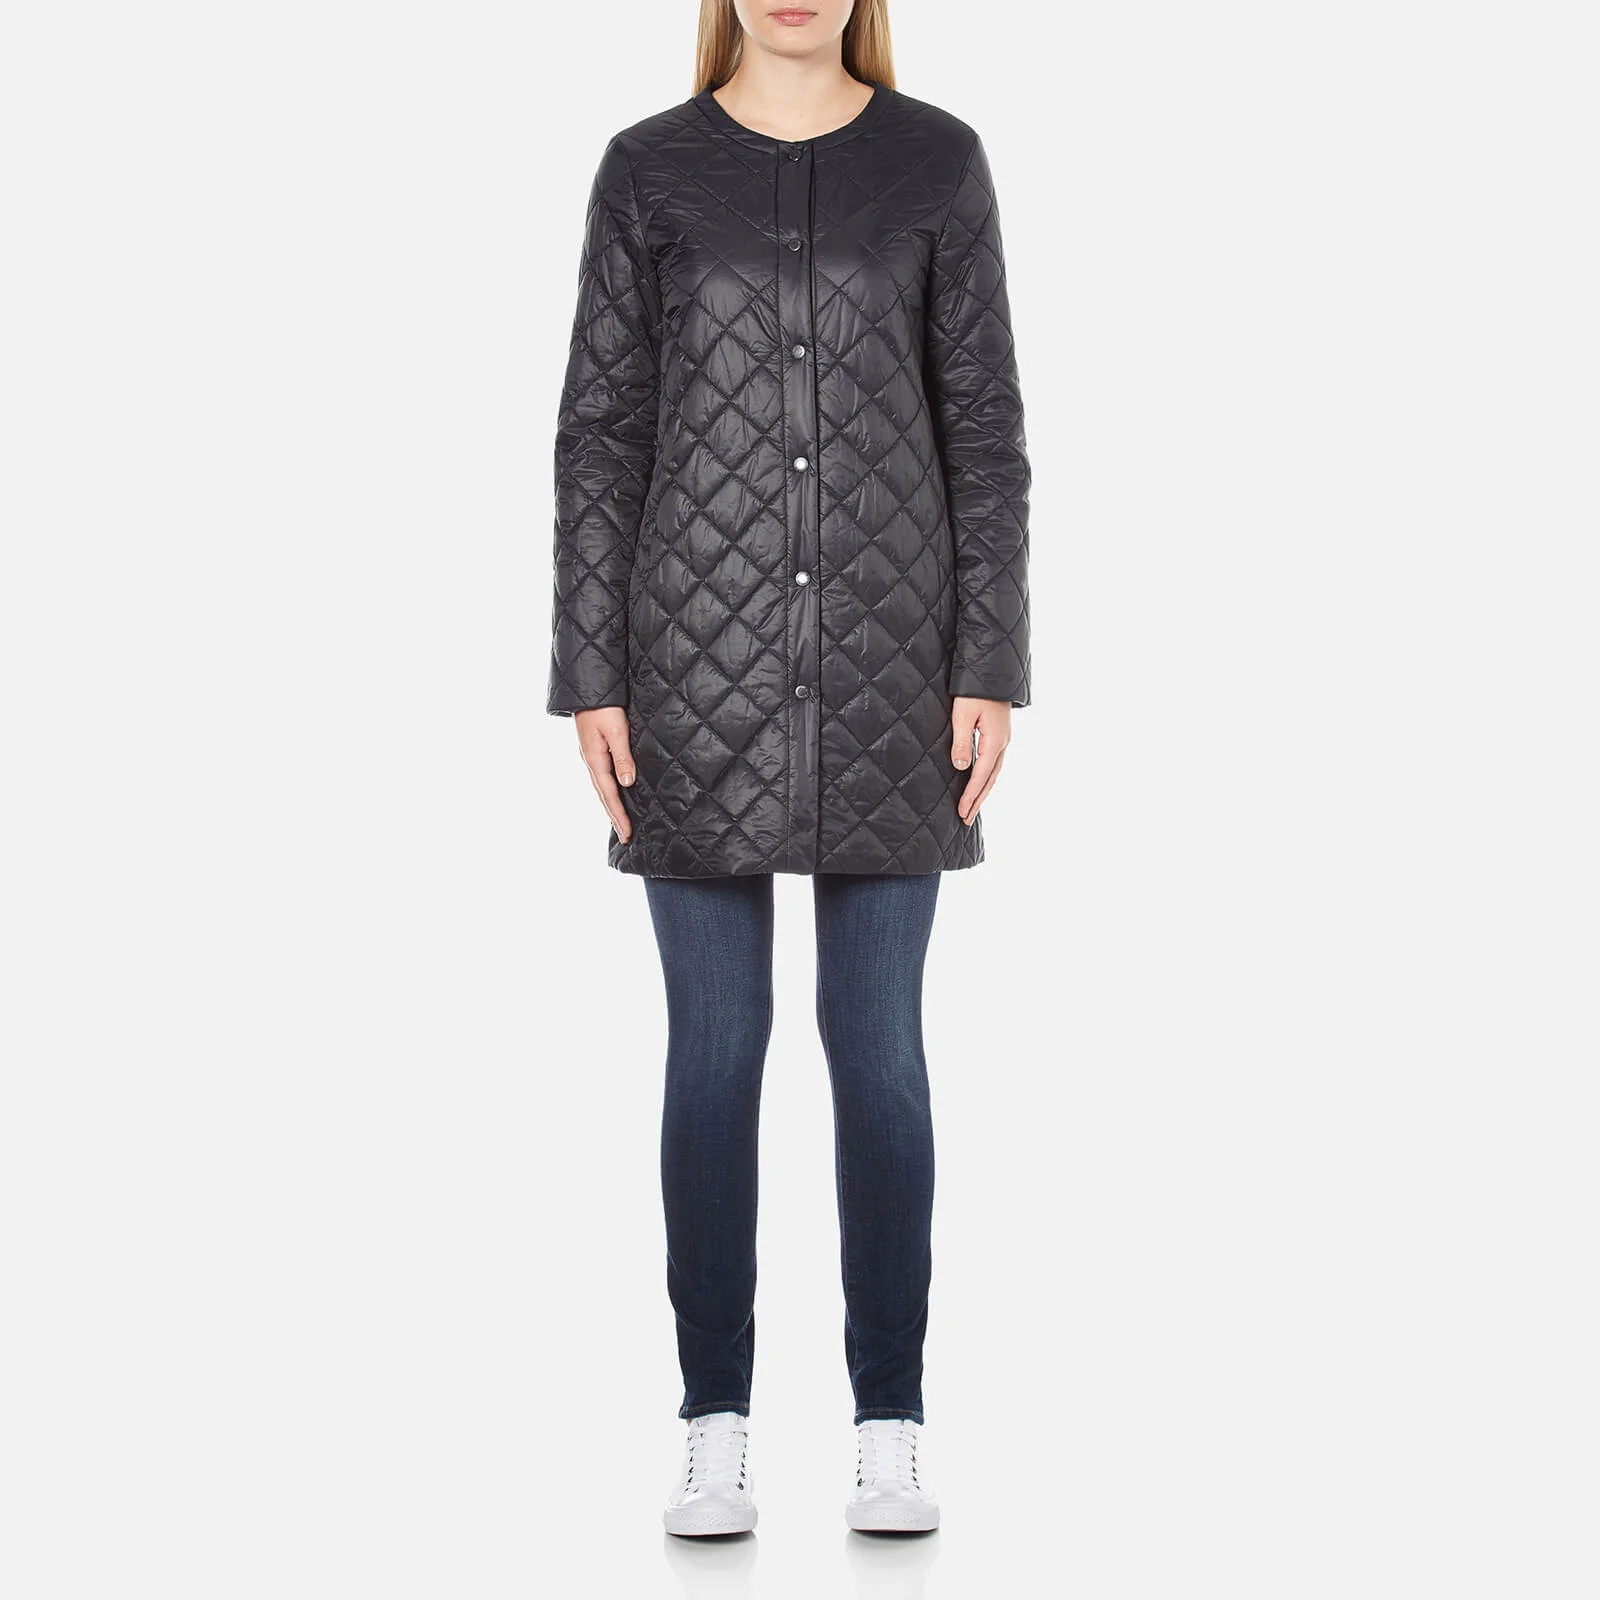 Barbour Women's Collarless Border Quilted Jacket - Black Image 1